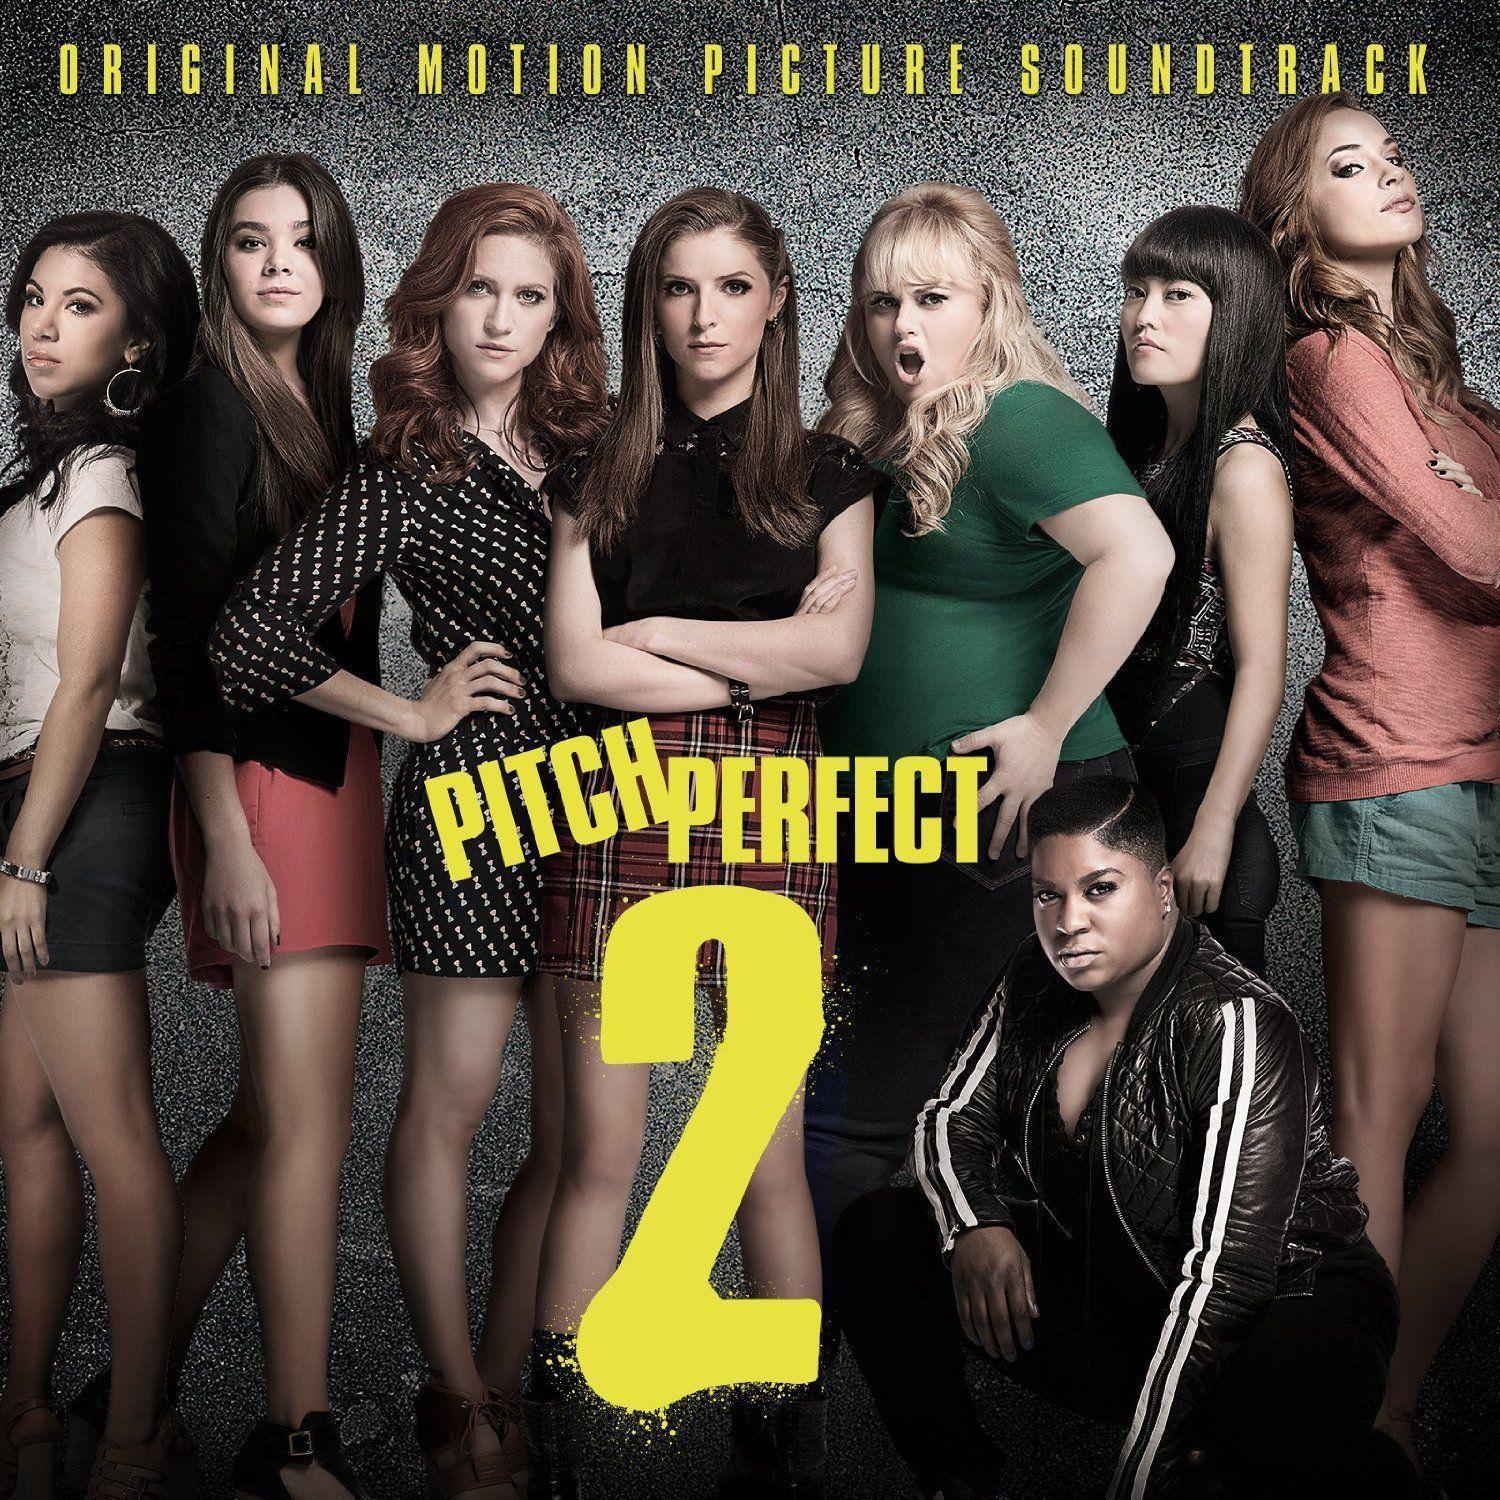 759x422px Pitch Perfect 2 54.13 KB